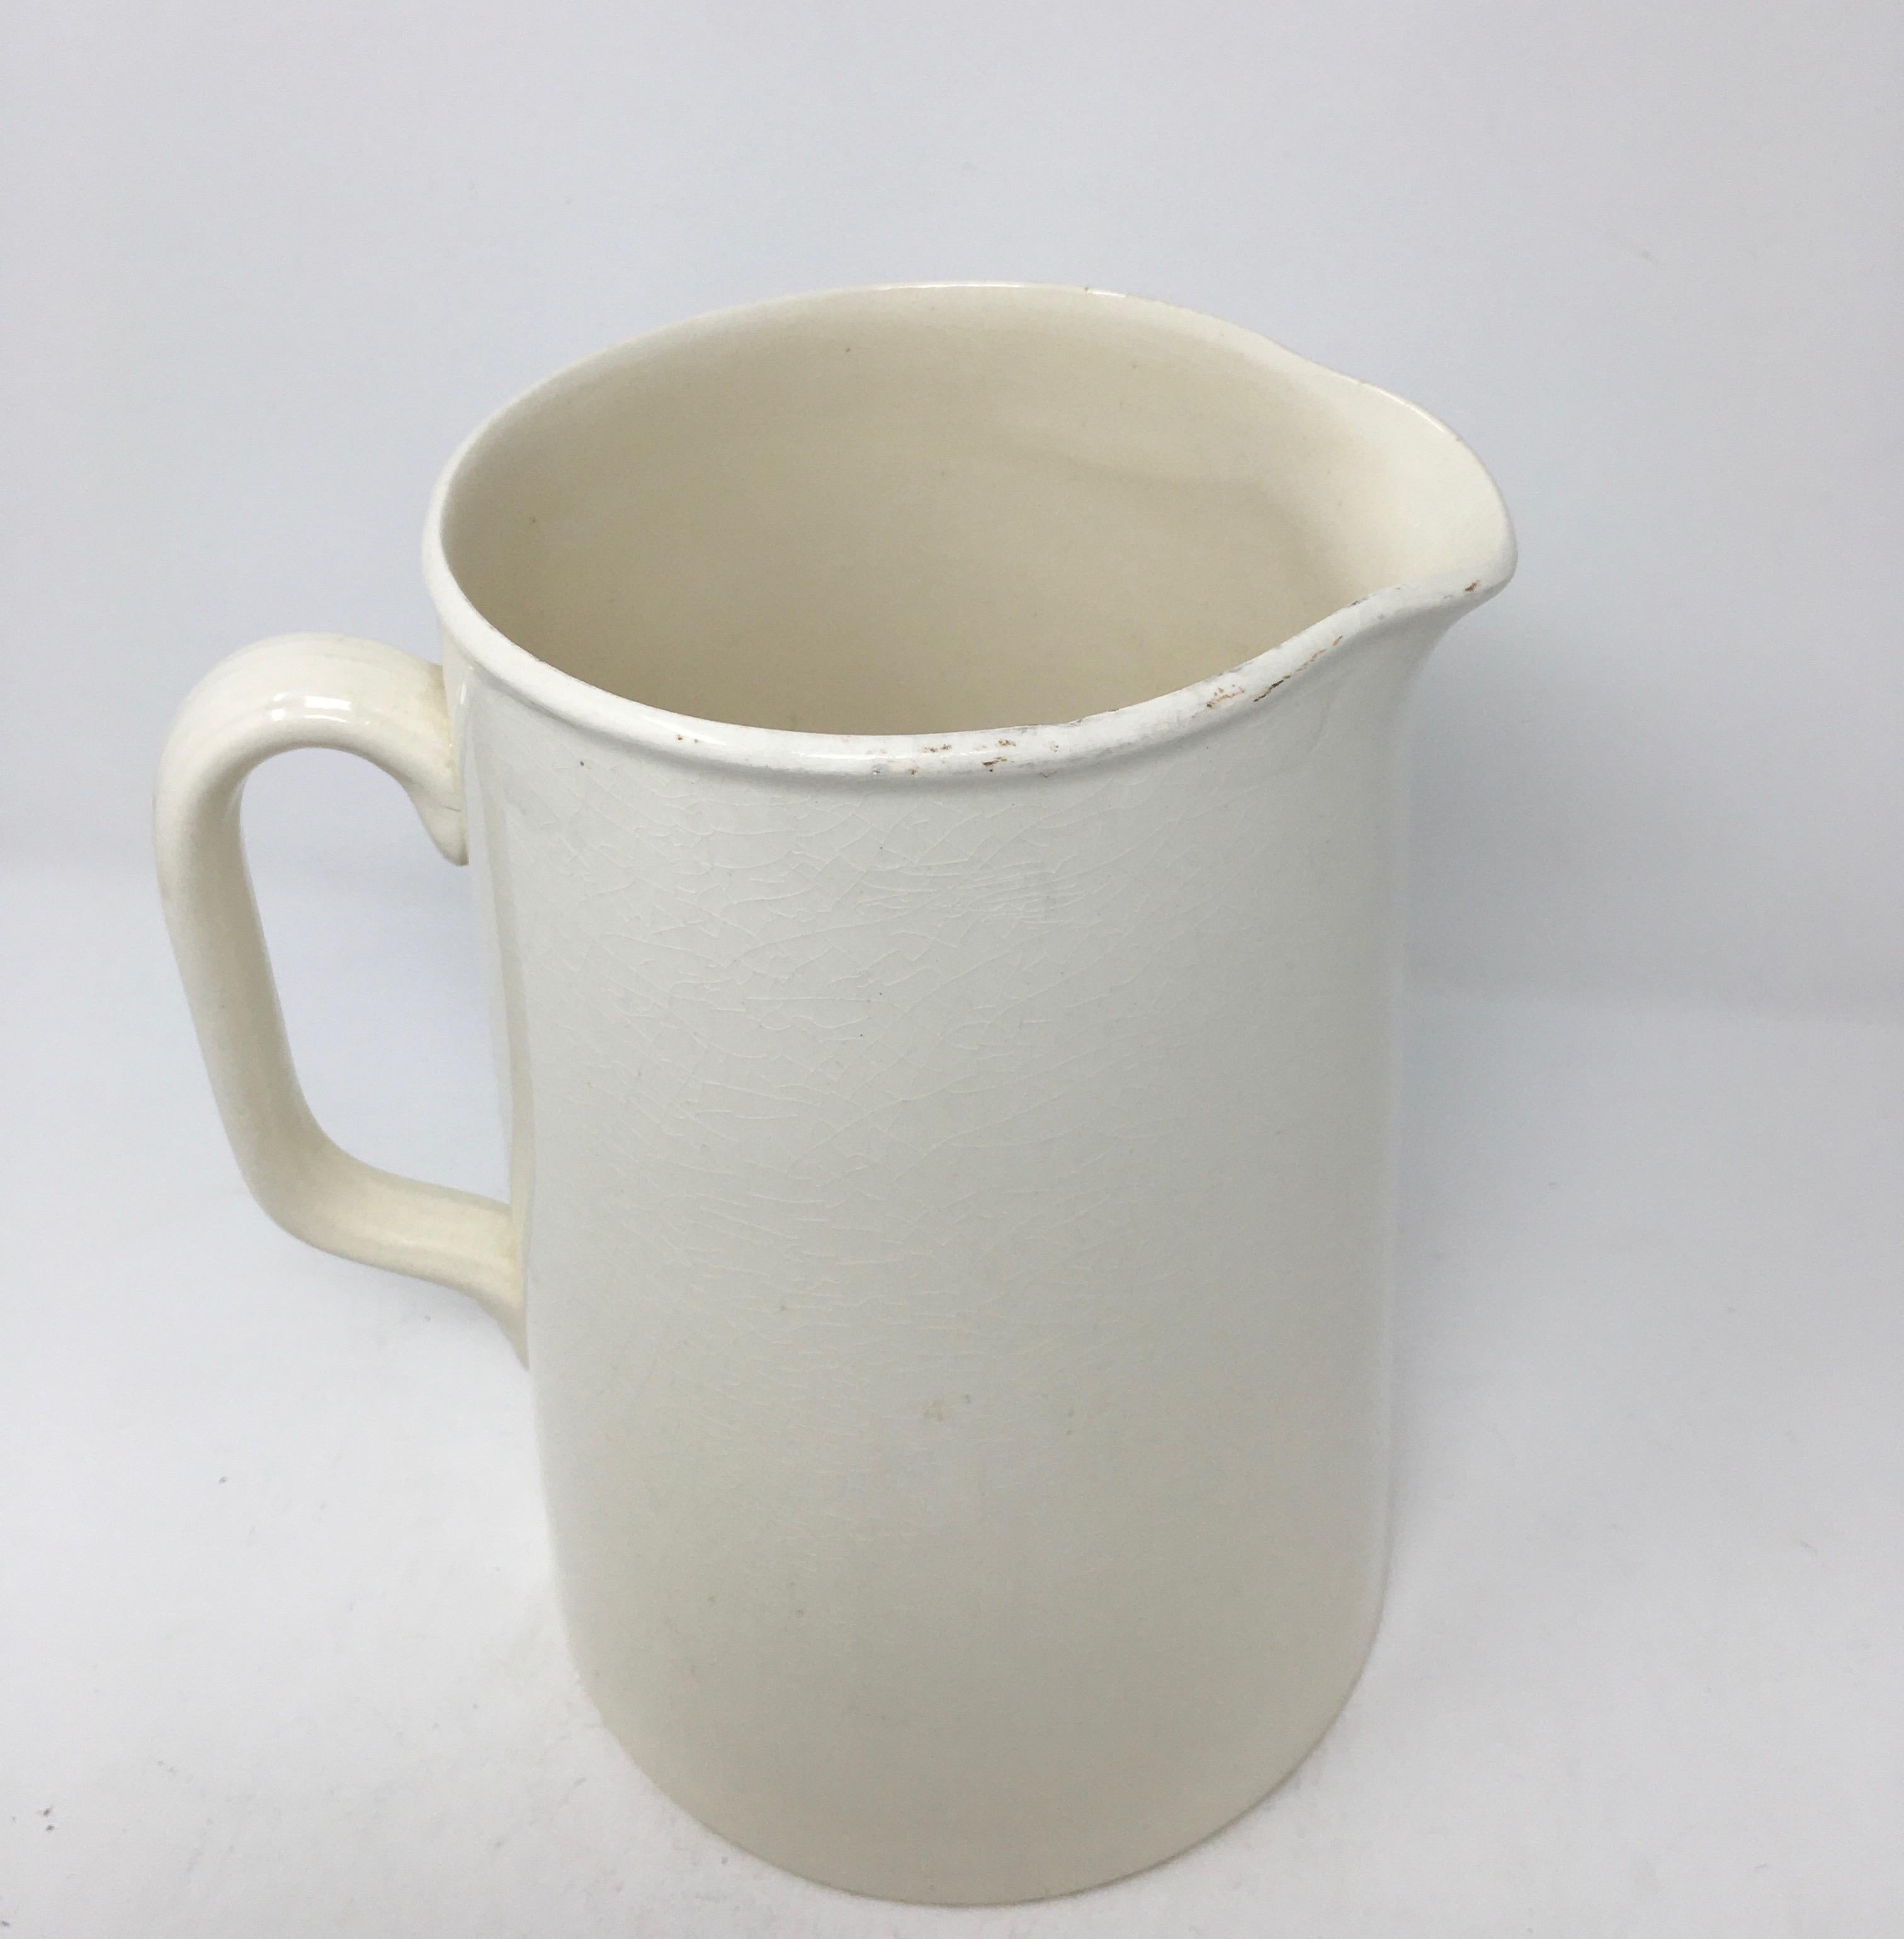 A lovely large early 20th century banded white ironstone pitcher, signed Bridgewood England on the bottom. This beautiful pitcher has simple clean lines, perfect for any decor. It would be a wonderful addition to a collection and look gorgeous